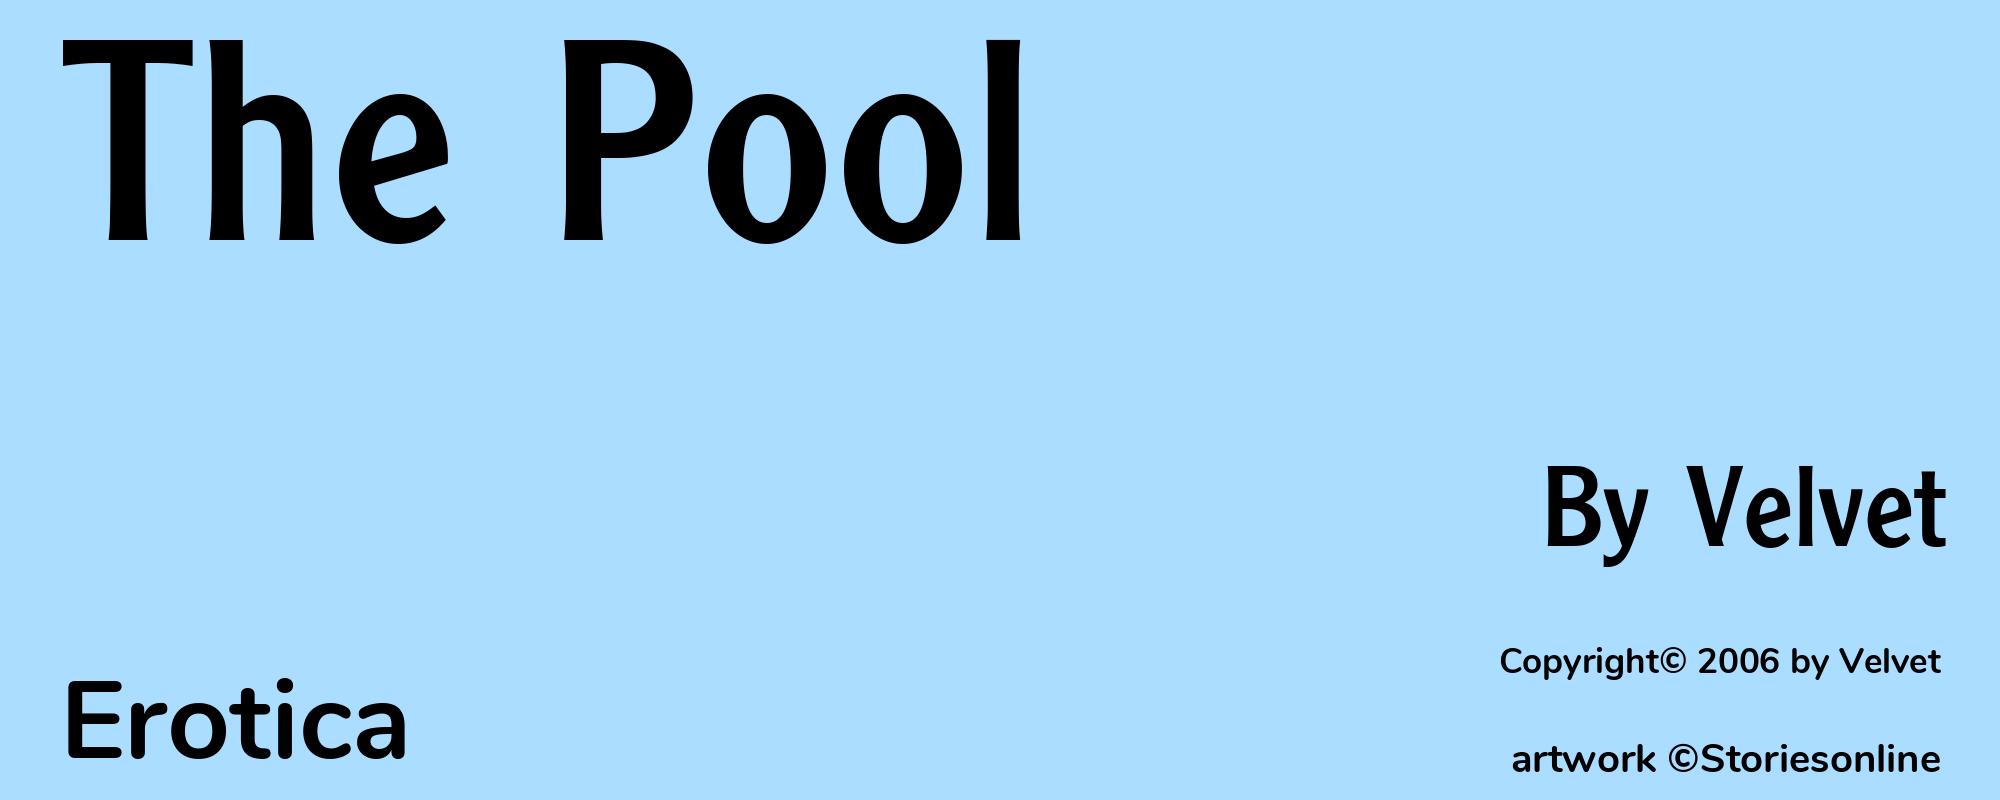 The Pool - Cover